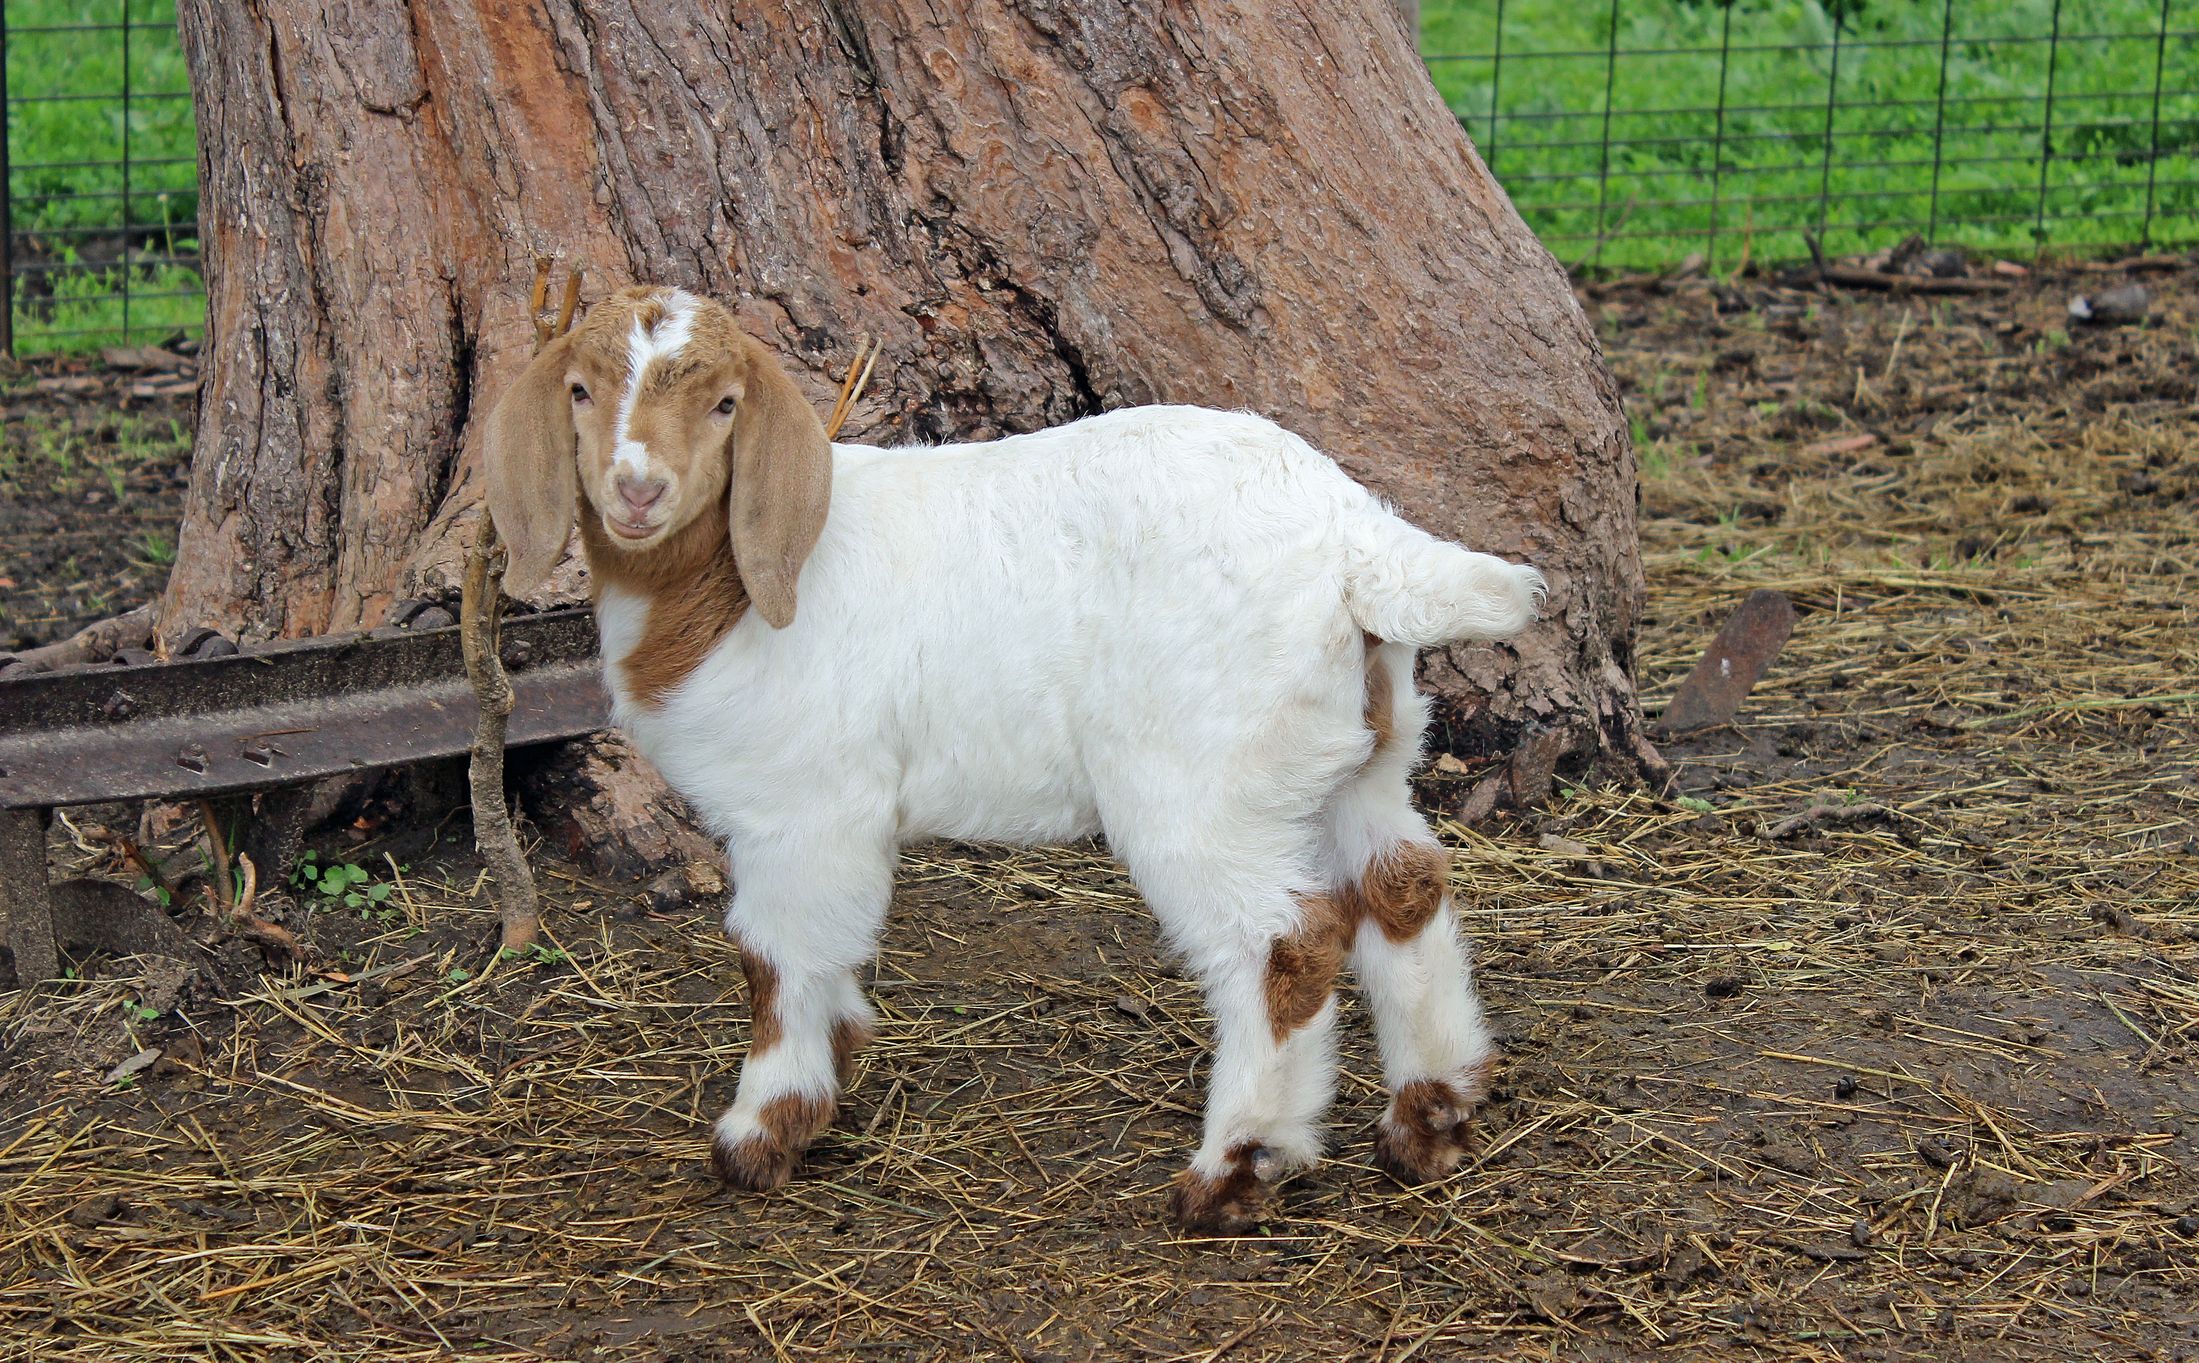 California Police Traveled 500 Miles To Seize Girl's Pet Goat for